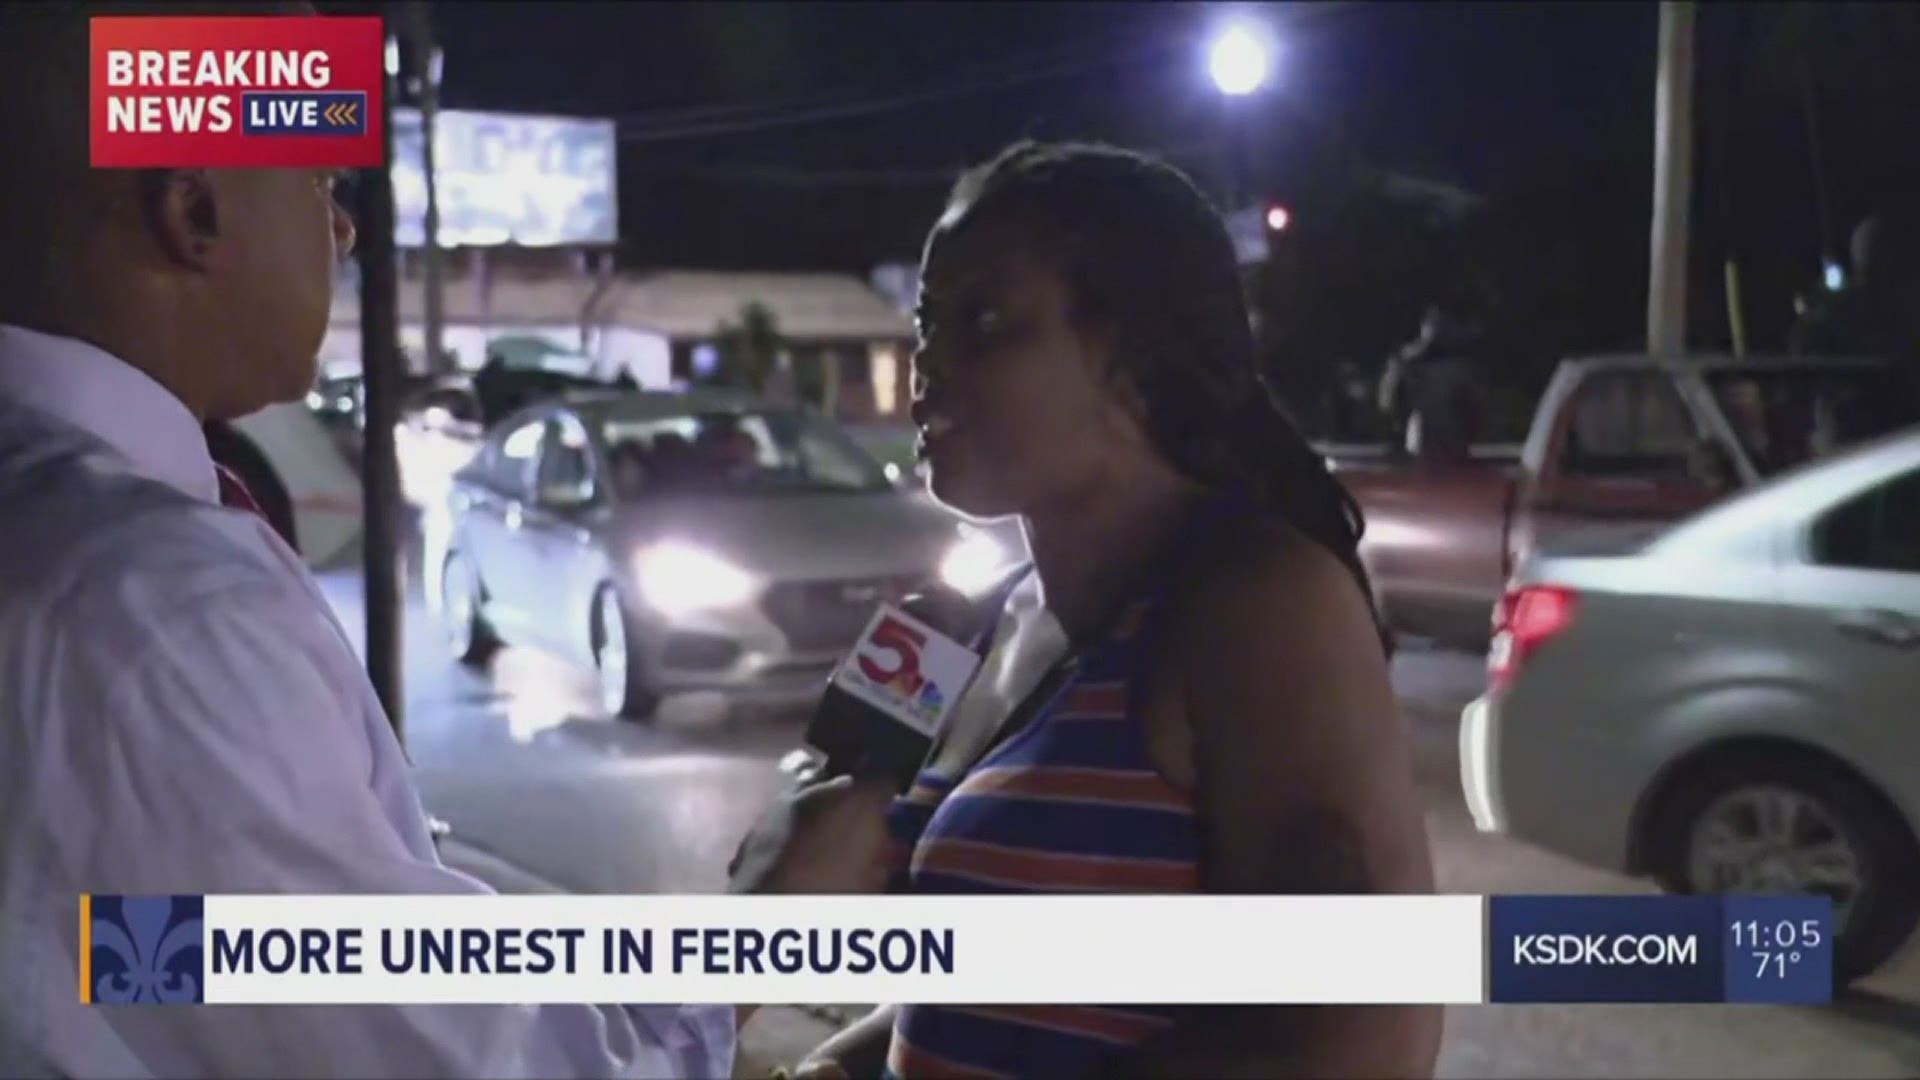 She said she does not think the people who remained late at night were not from Ferguson.